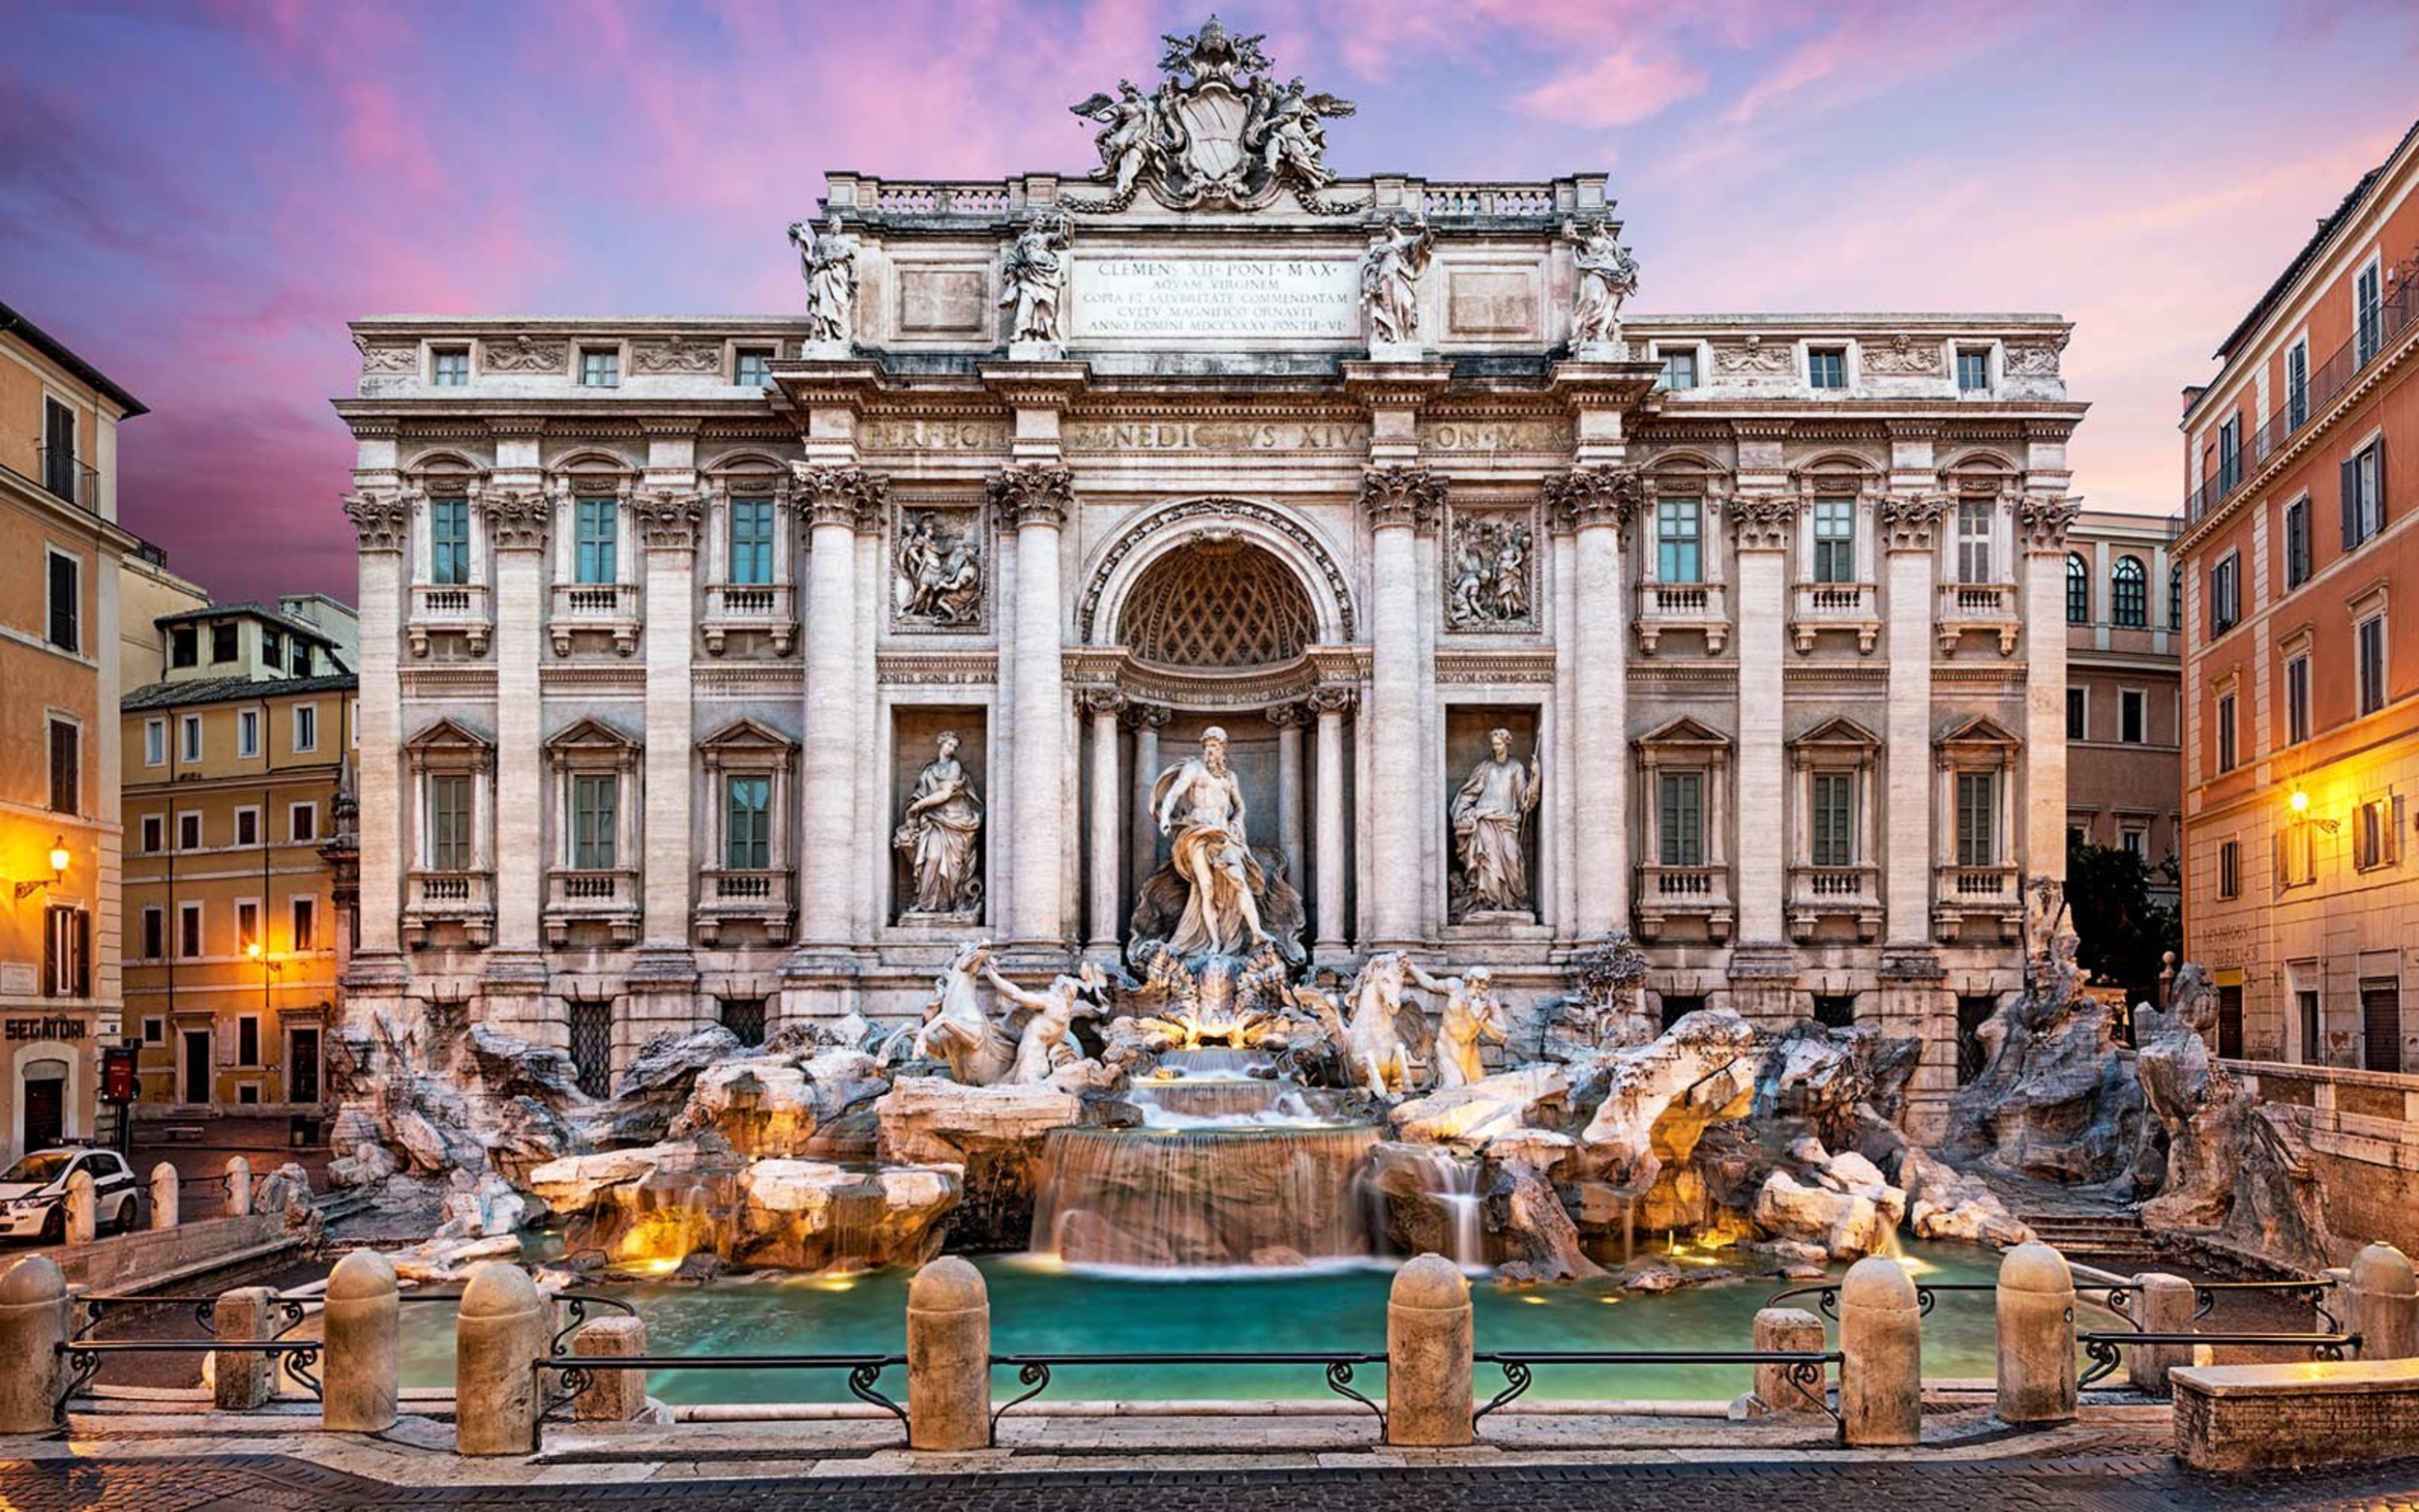 <p>Often referred to as "The Three Street Fountain," the Trevi Fountain is an excellent example of the city's regional art. Located at the intersection of three streets, this fountain draws in visitors from all sides of Rome. Its statues are a lineup of masterpieces from Nicola Salvi, but the real reason everyone is here is because of Federico Fellini, who shot the famous scene of Marcello Mastroianni and Anita Ekberg lapping in the pool at midnight. </p><p>You may also like: <a href='https://www.yardbarker.com/lifestyle/articles/20_items_you_should_declutter_from_your_home_right_now_112723/s1__38830539'>20 items you should declutter from your home right now</a></p>